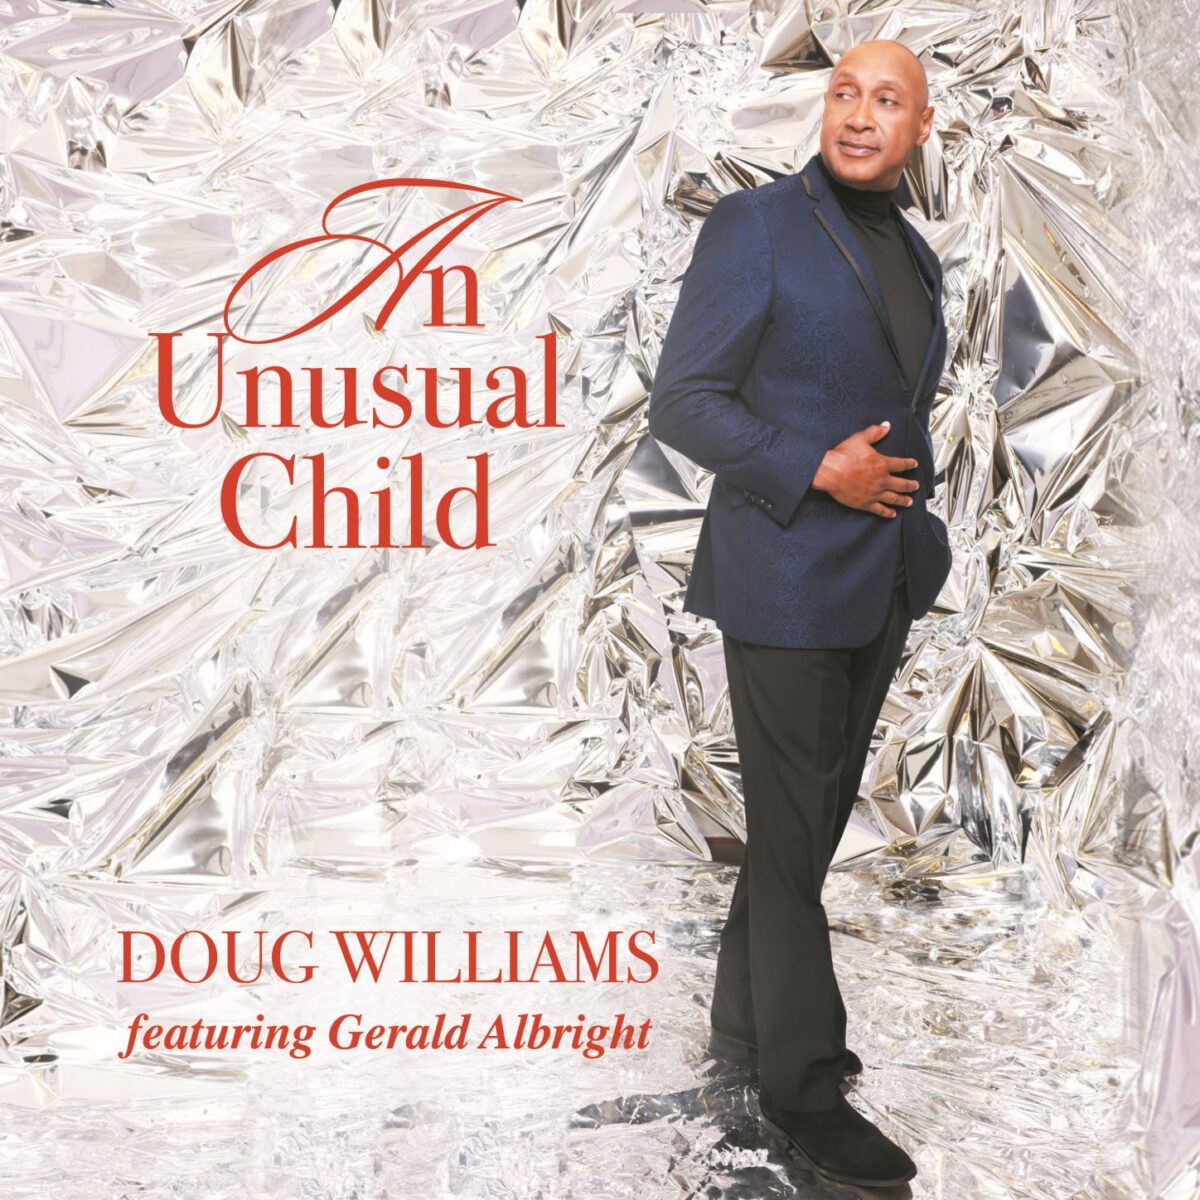 doug-williams-announces-new-label-+-new-holiday-single-featuring-gerald-albright!